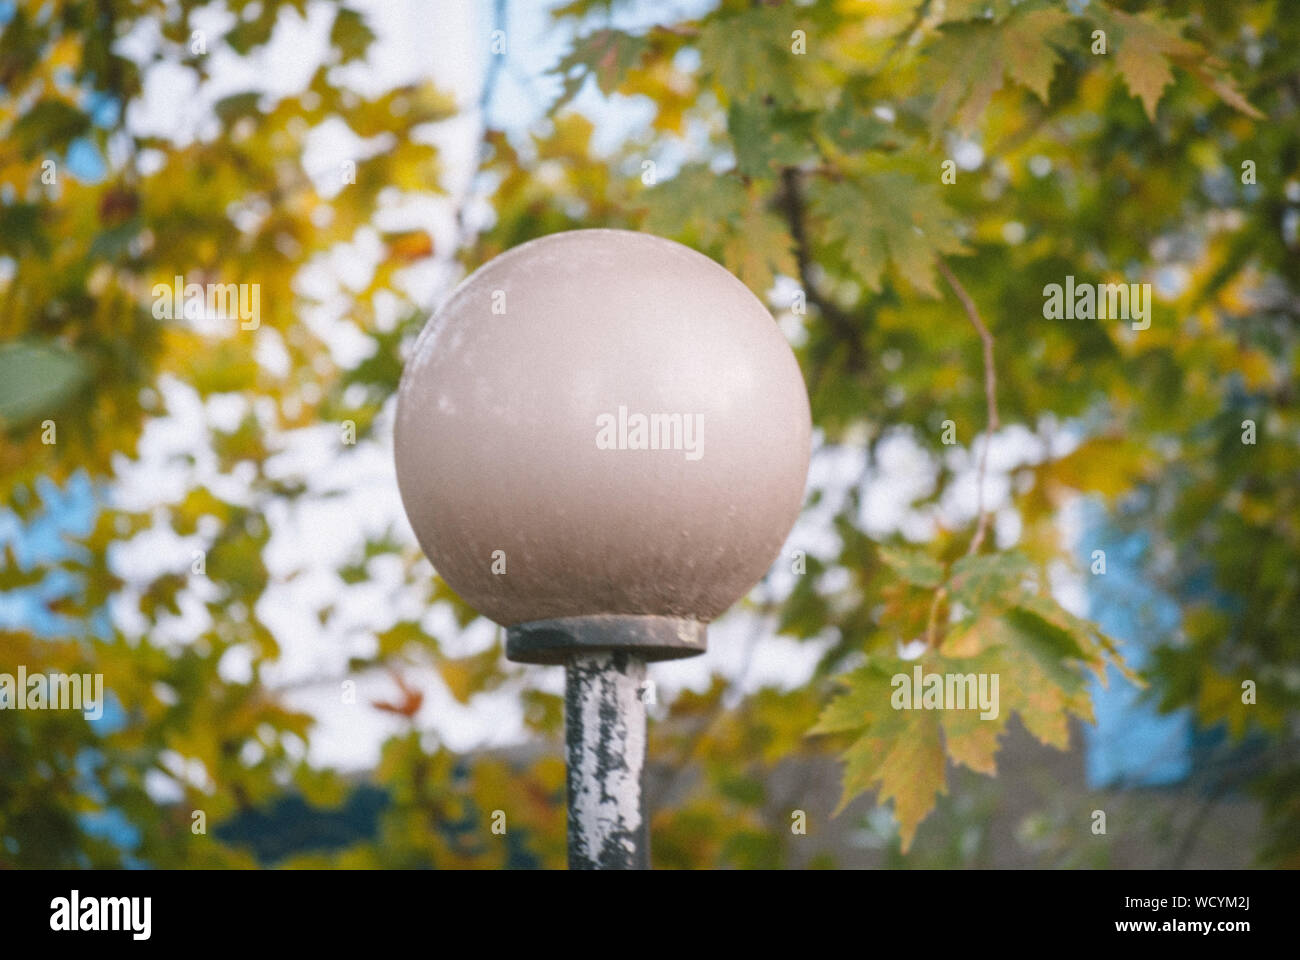 Low Angle View Of Lamp Post Against Trees Stock Photo